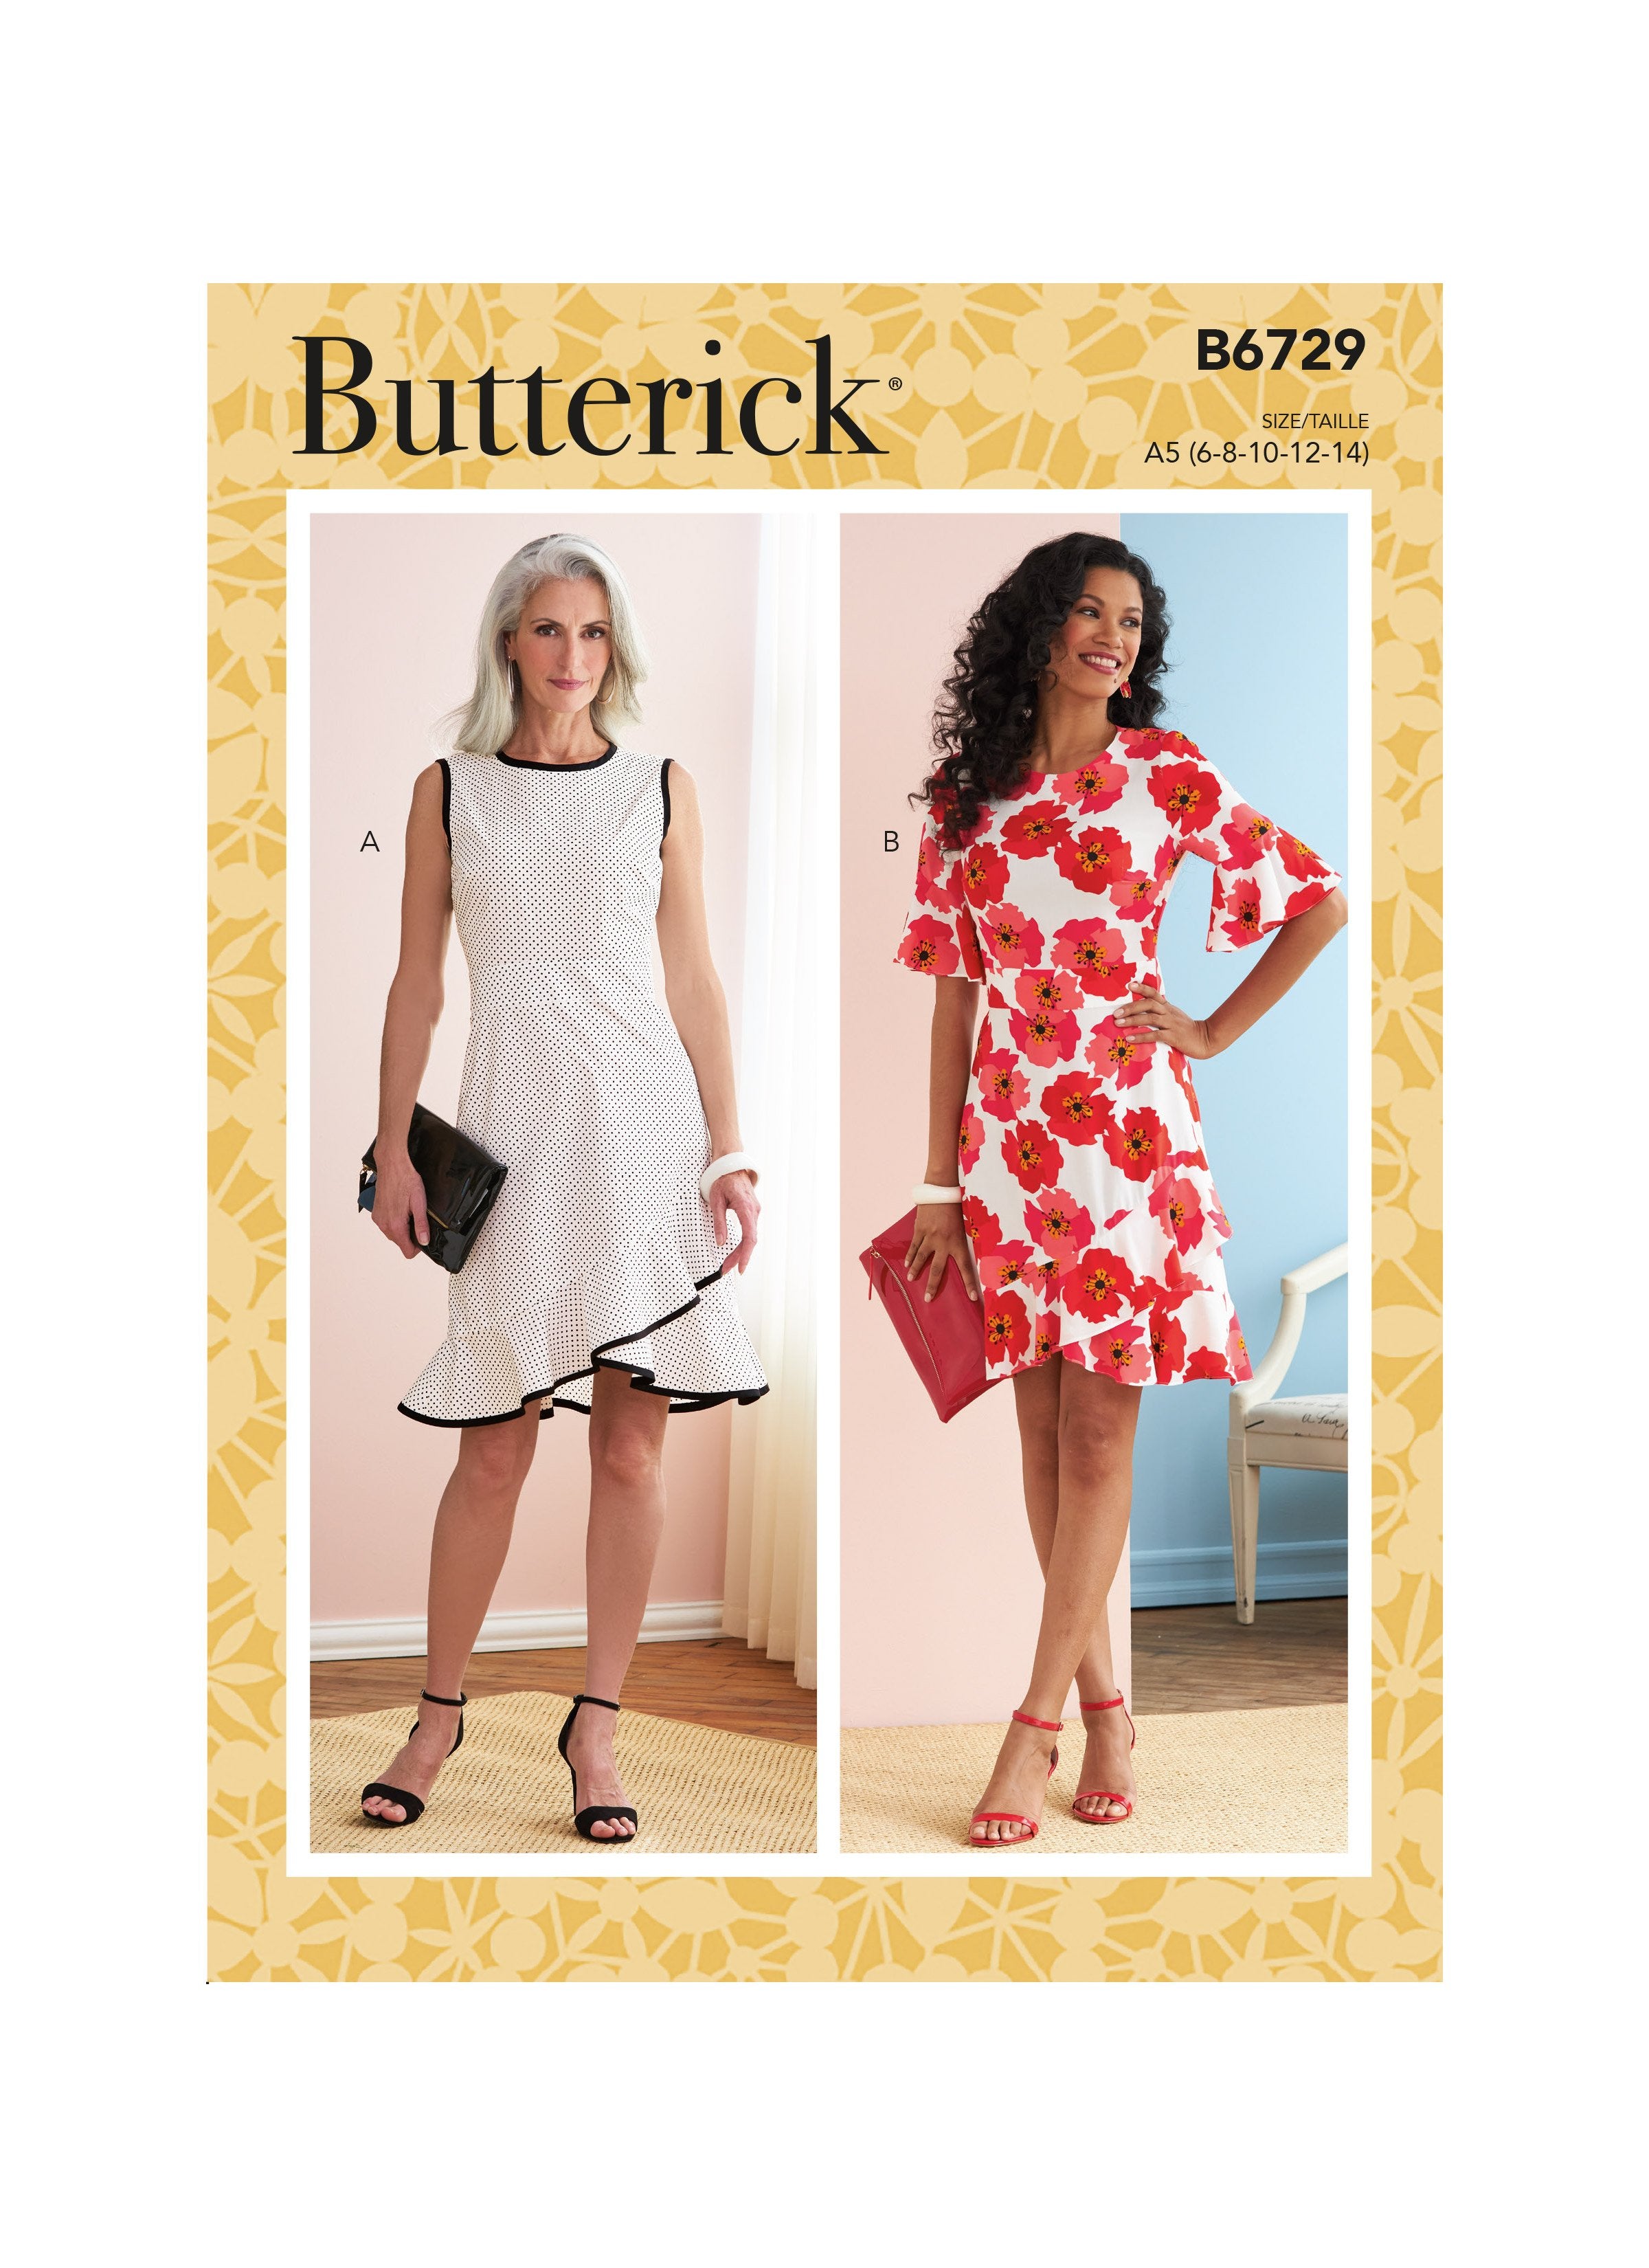 Butterick Sewing Pattern 6729 Misses' Dresses from Jaycotts Sewing Supplies